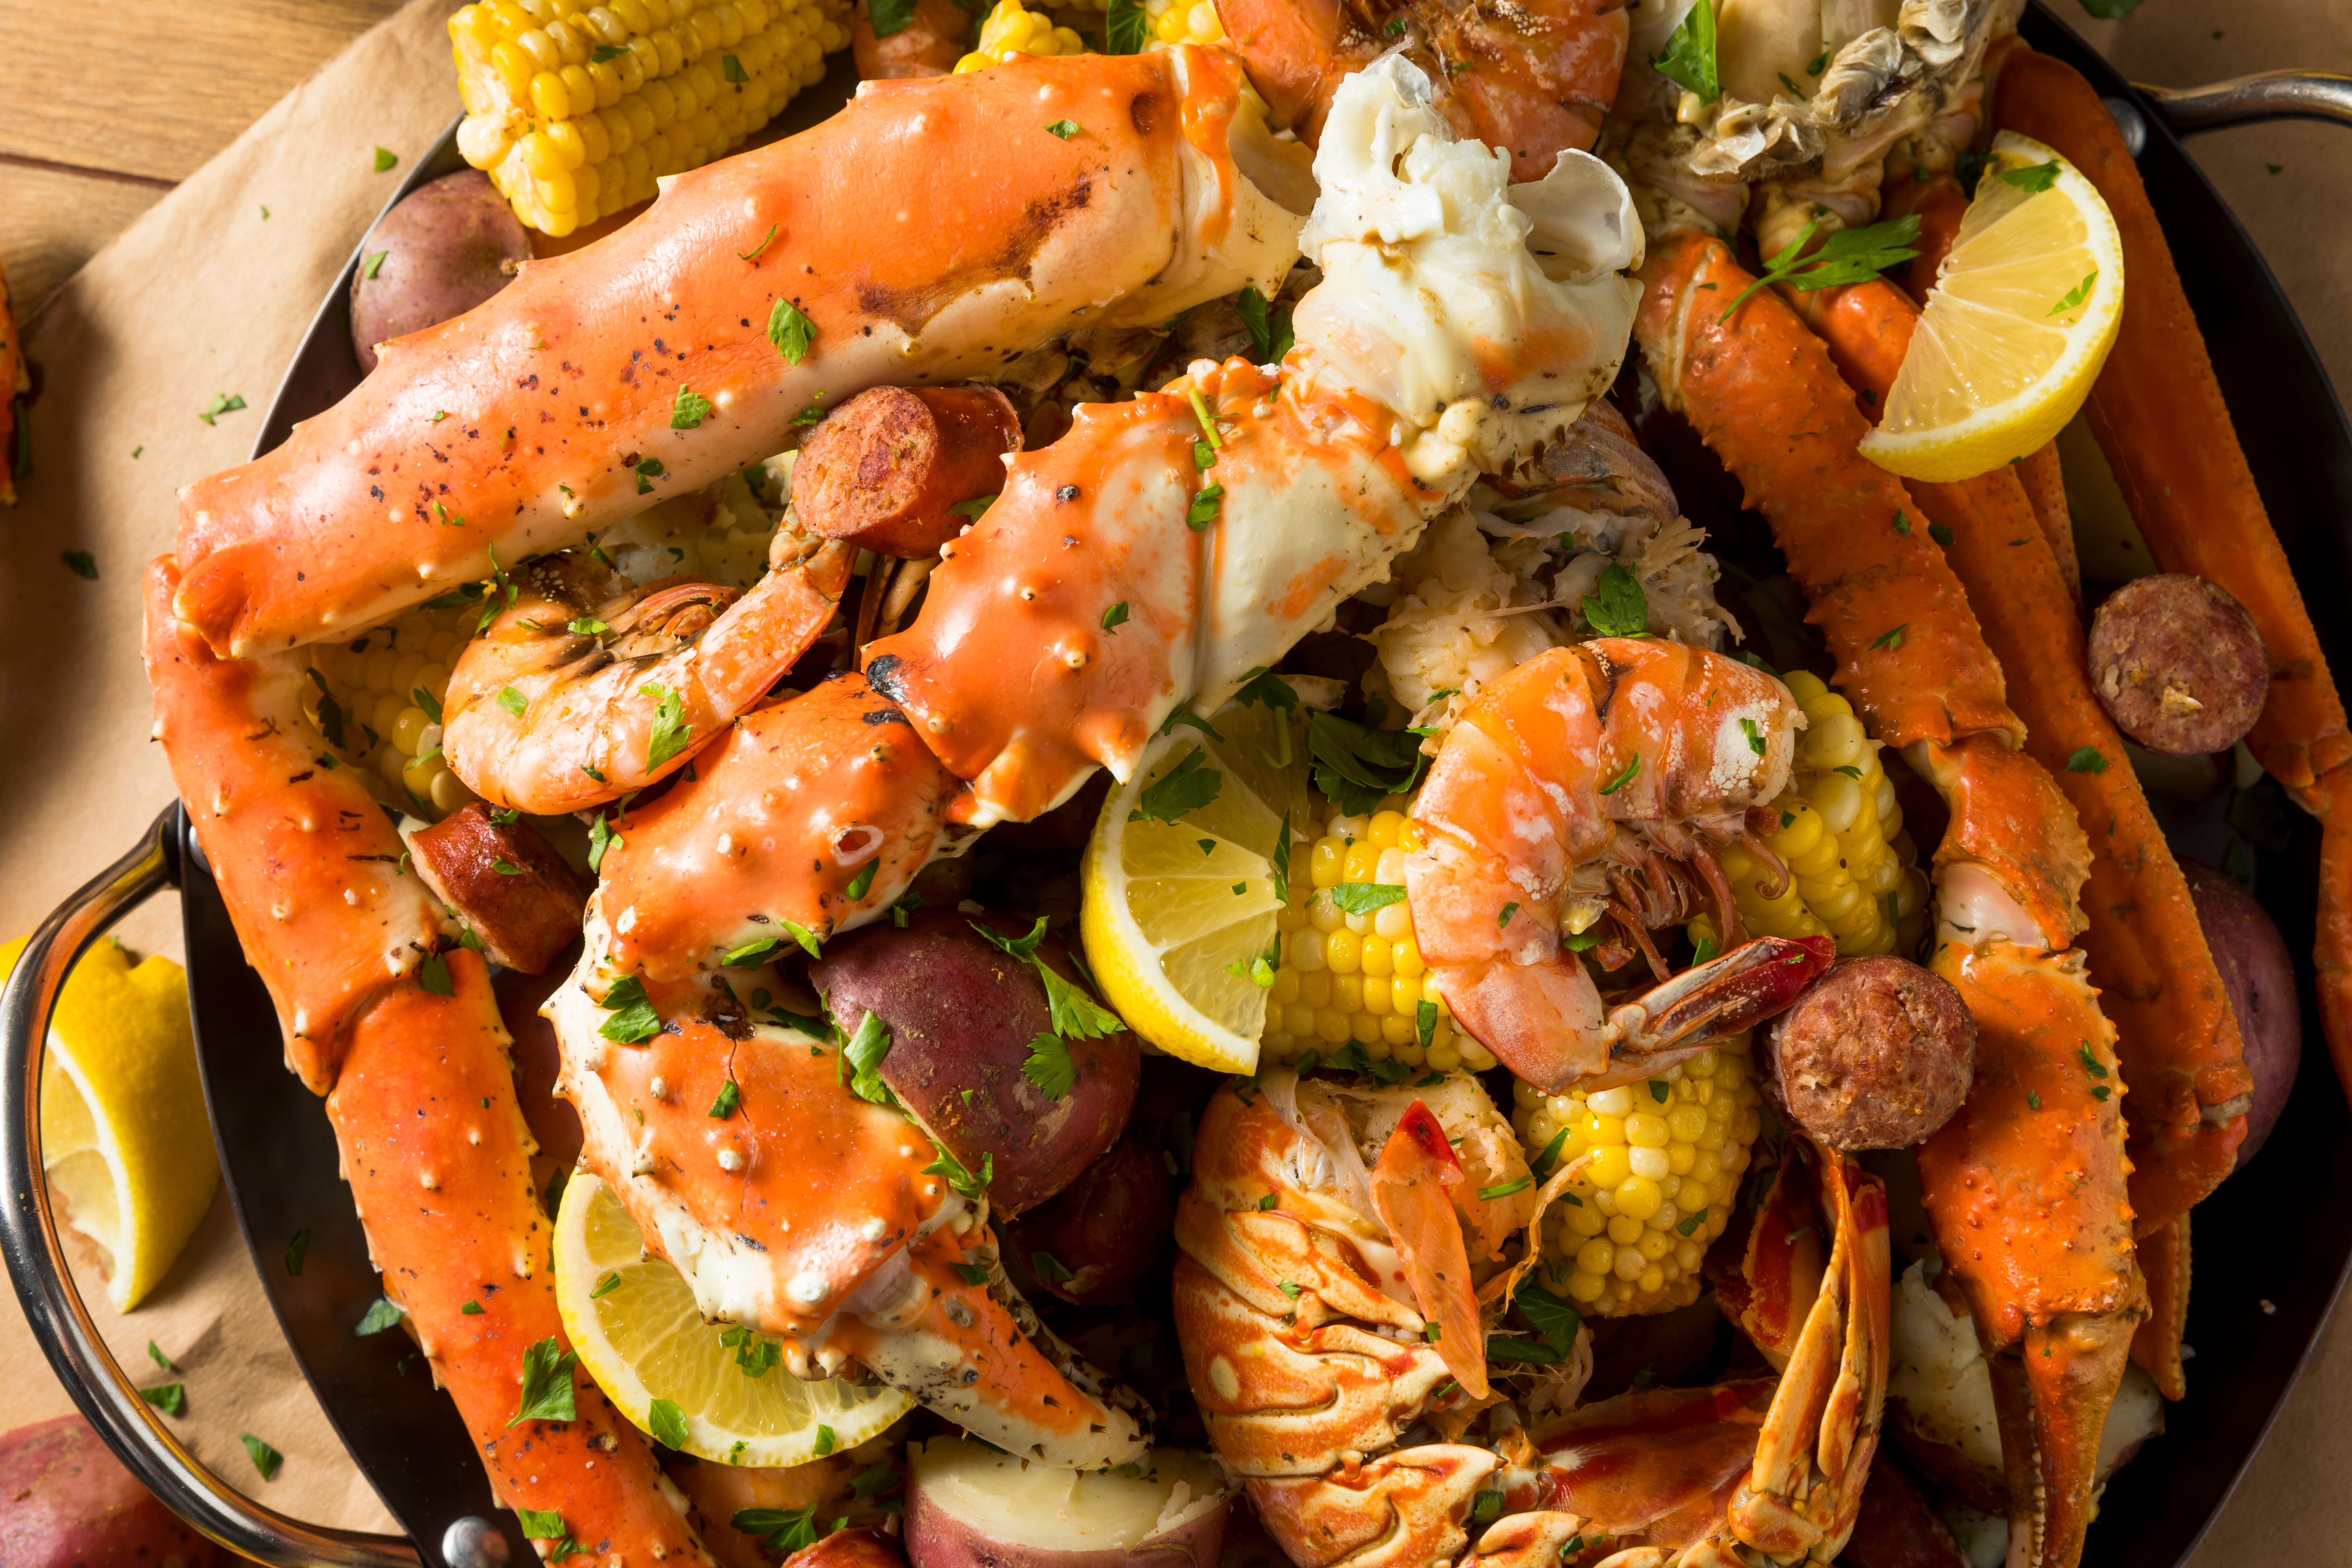 A homemade Cajun seafood boil with lobster, crab, and shrimp and slices of lemon.